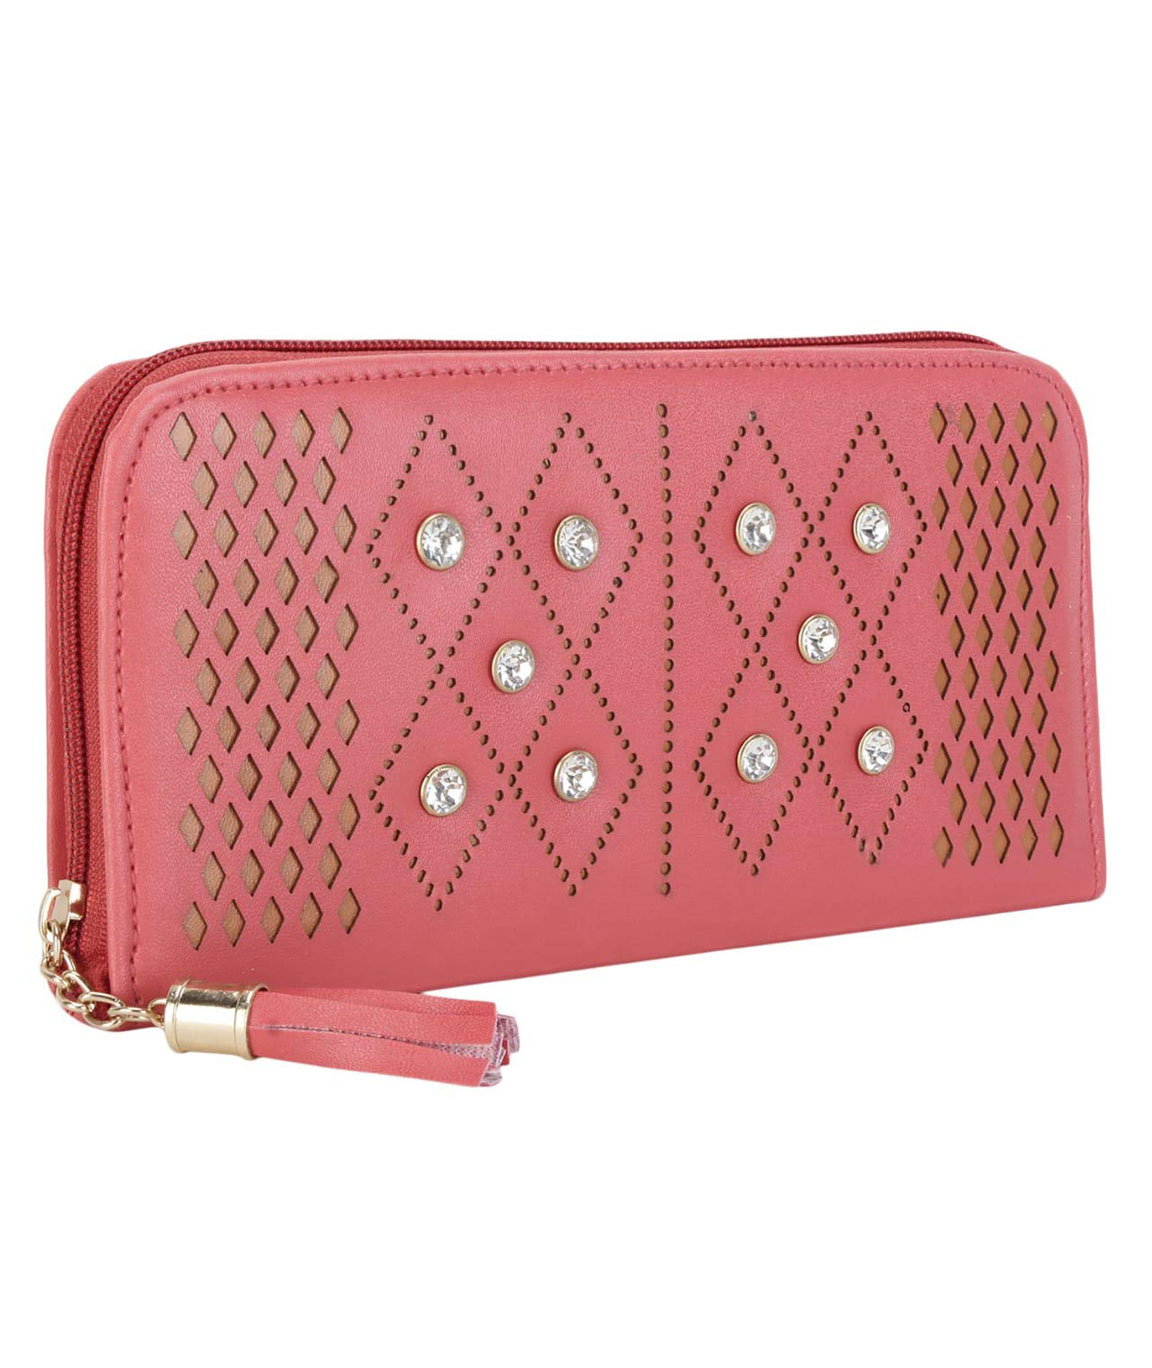 Buy Women's PU Stylish Hand Clutch Hand Purse Online In India At Discounted  Prices